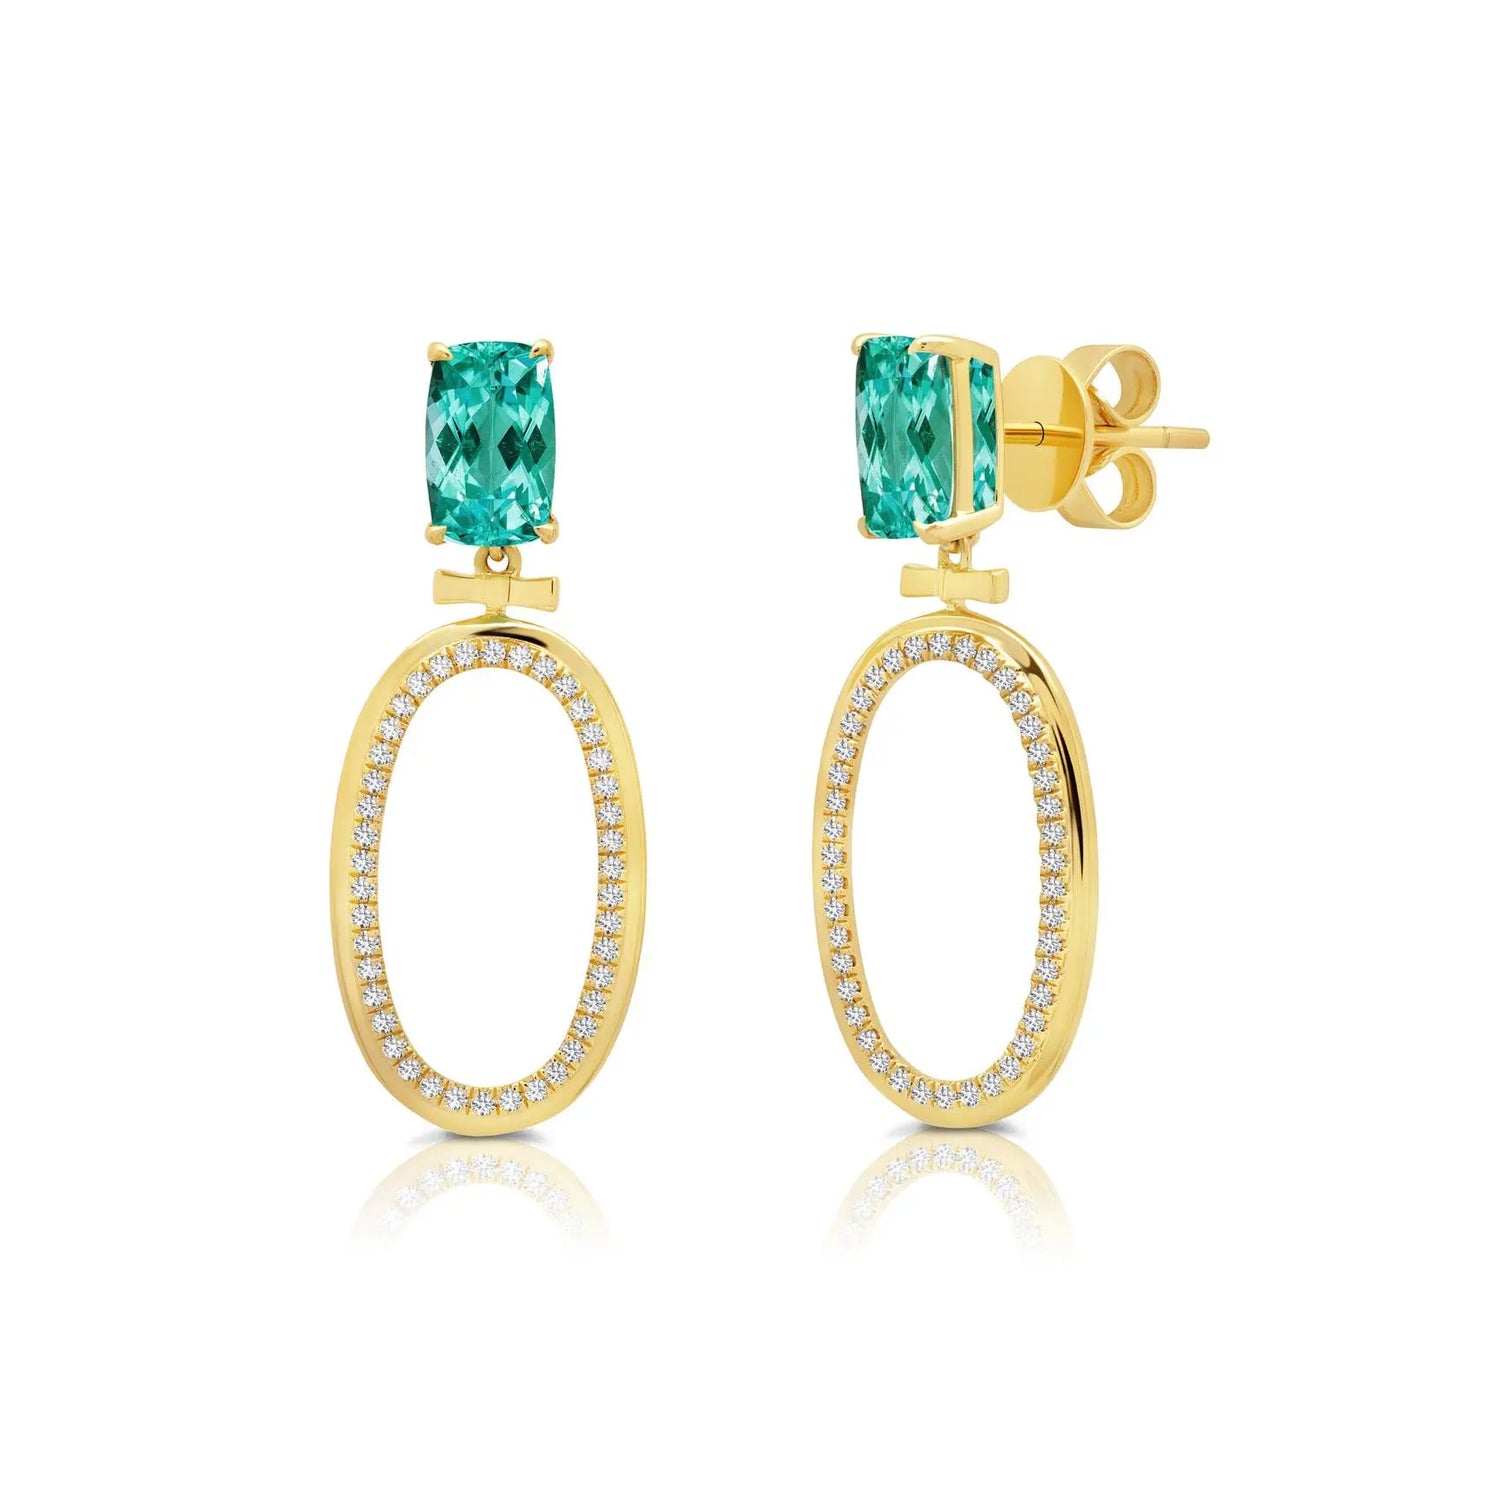 18k yellow gold with 2.24 Carats of Graziela Blue-Green Tourmaline, .27 Carats of G-H Color White Diamonds  Measurement:  Earring Measures 1 CM W X 3 CM Finishing:  Post & Clutch Back Designed by Graziela Gems